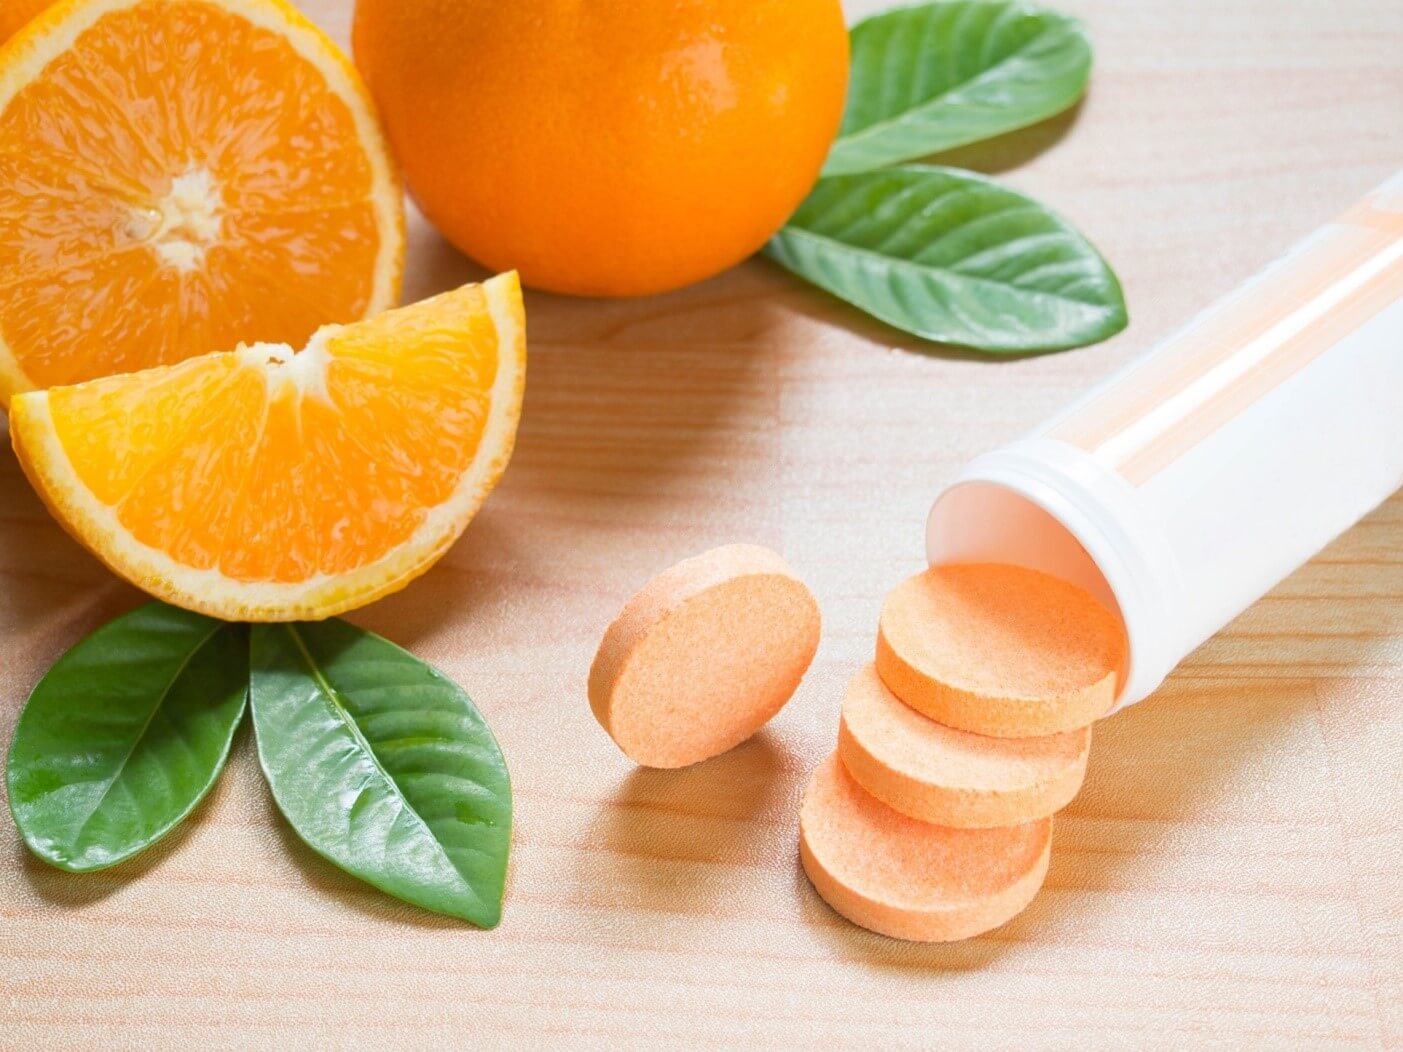 Vitamin C tablets and orange slices on a table